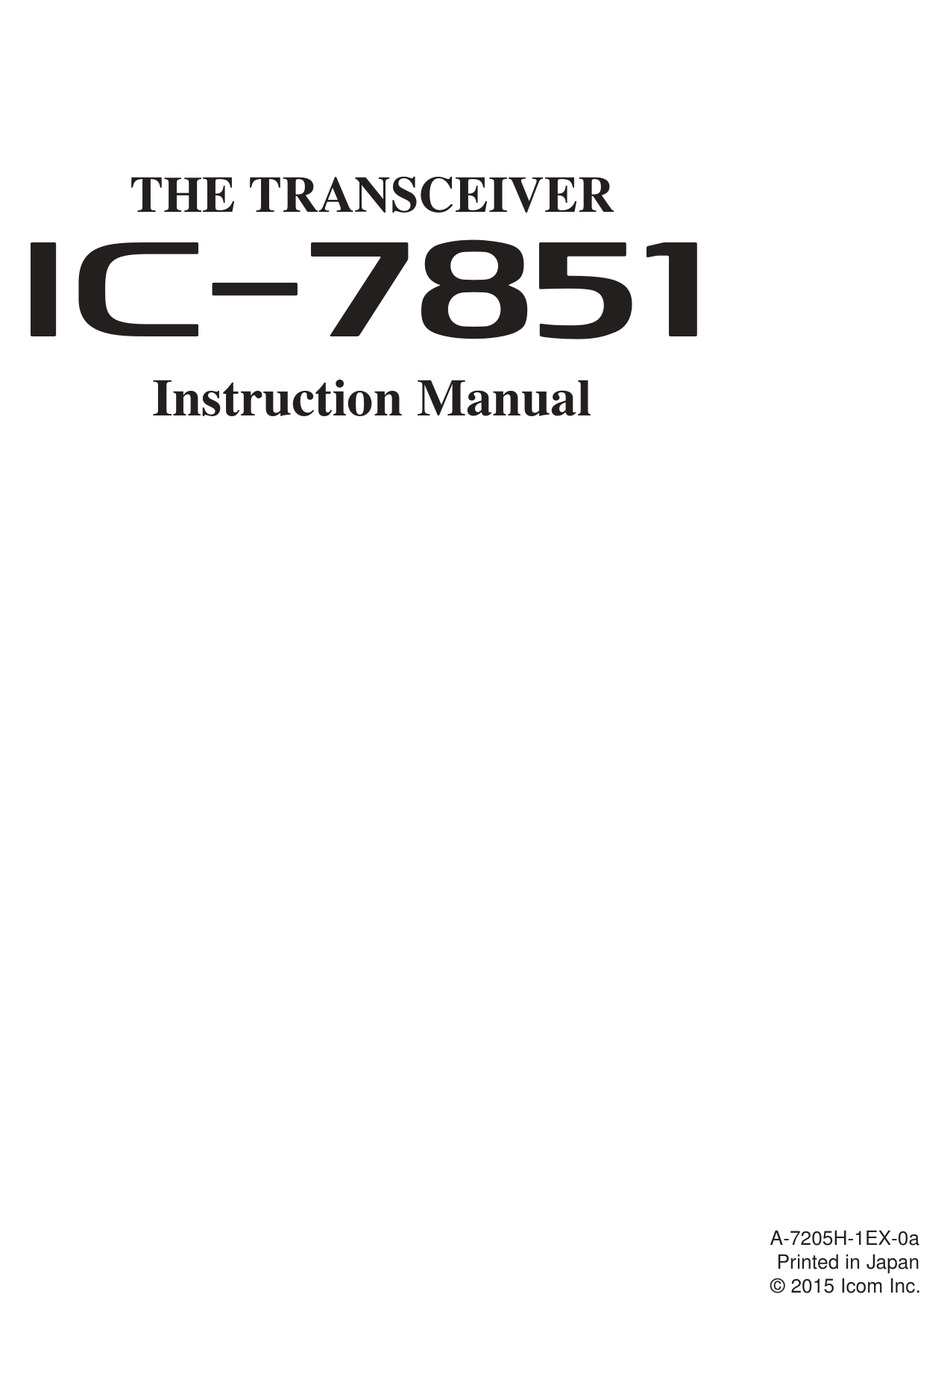 Protective Covers & Full Color! IC-7851 Instruction manual Icom IC-7850 